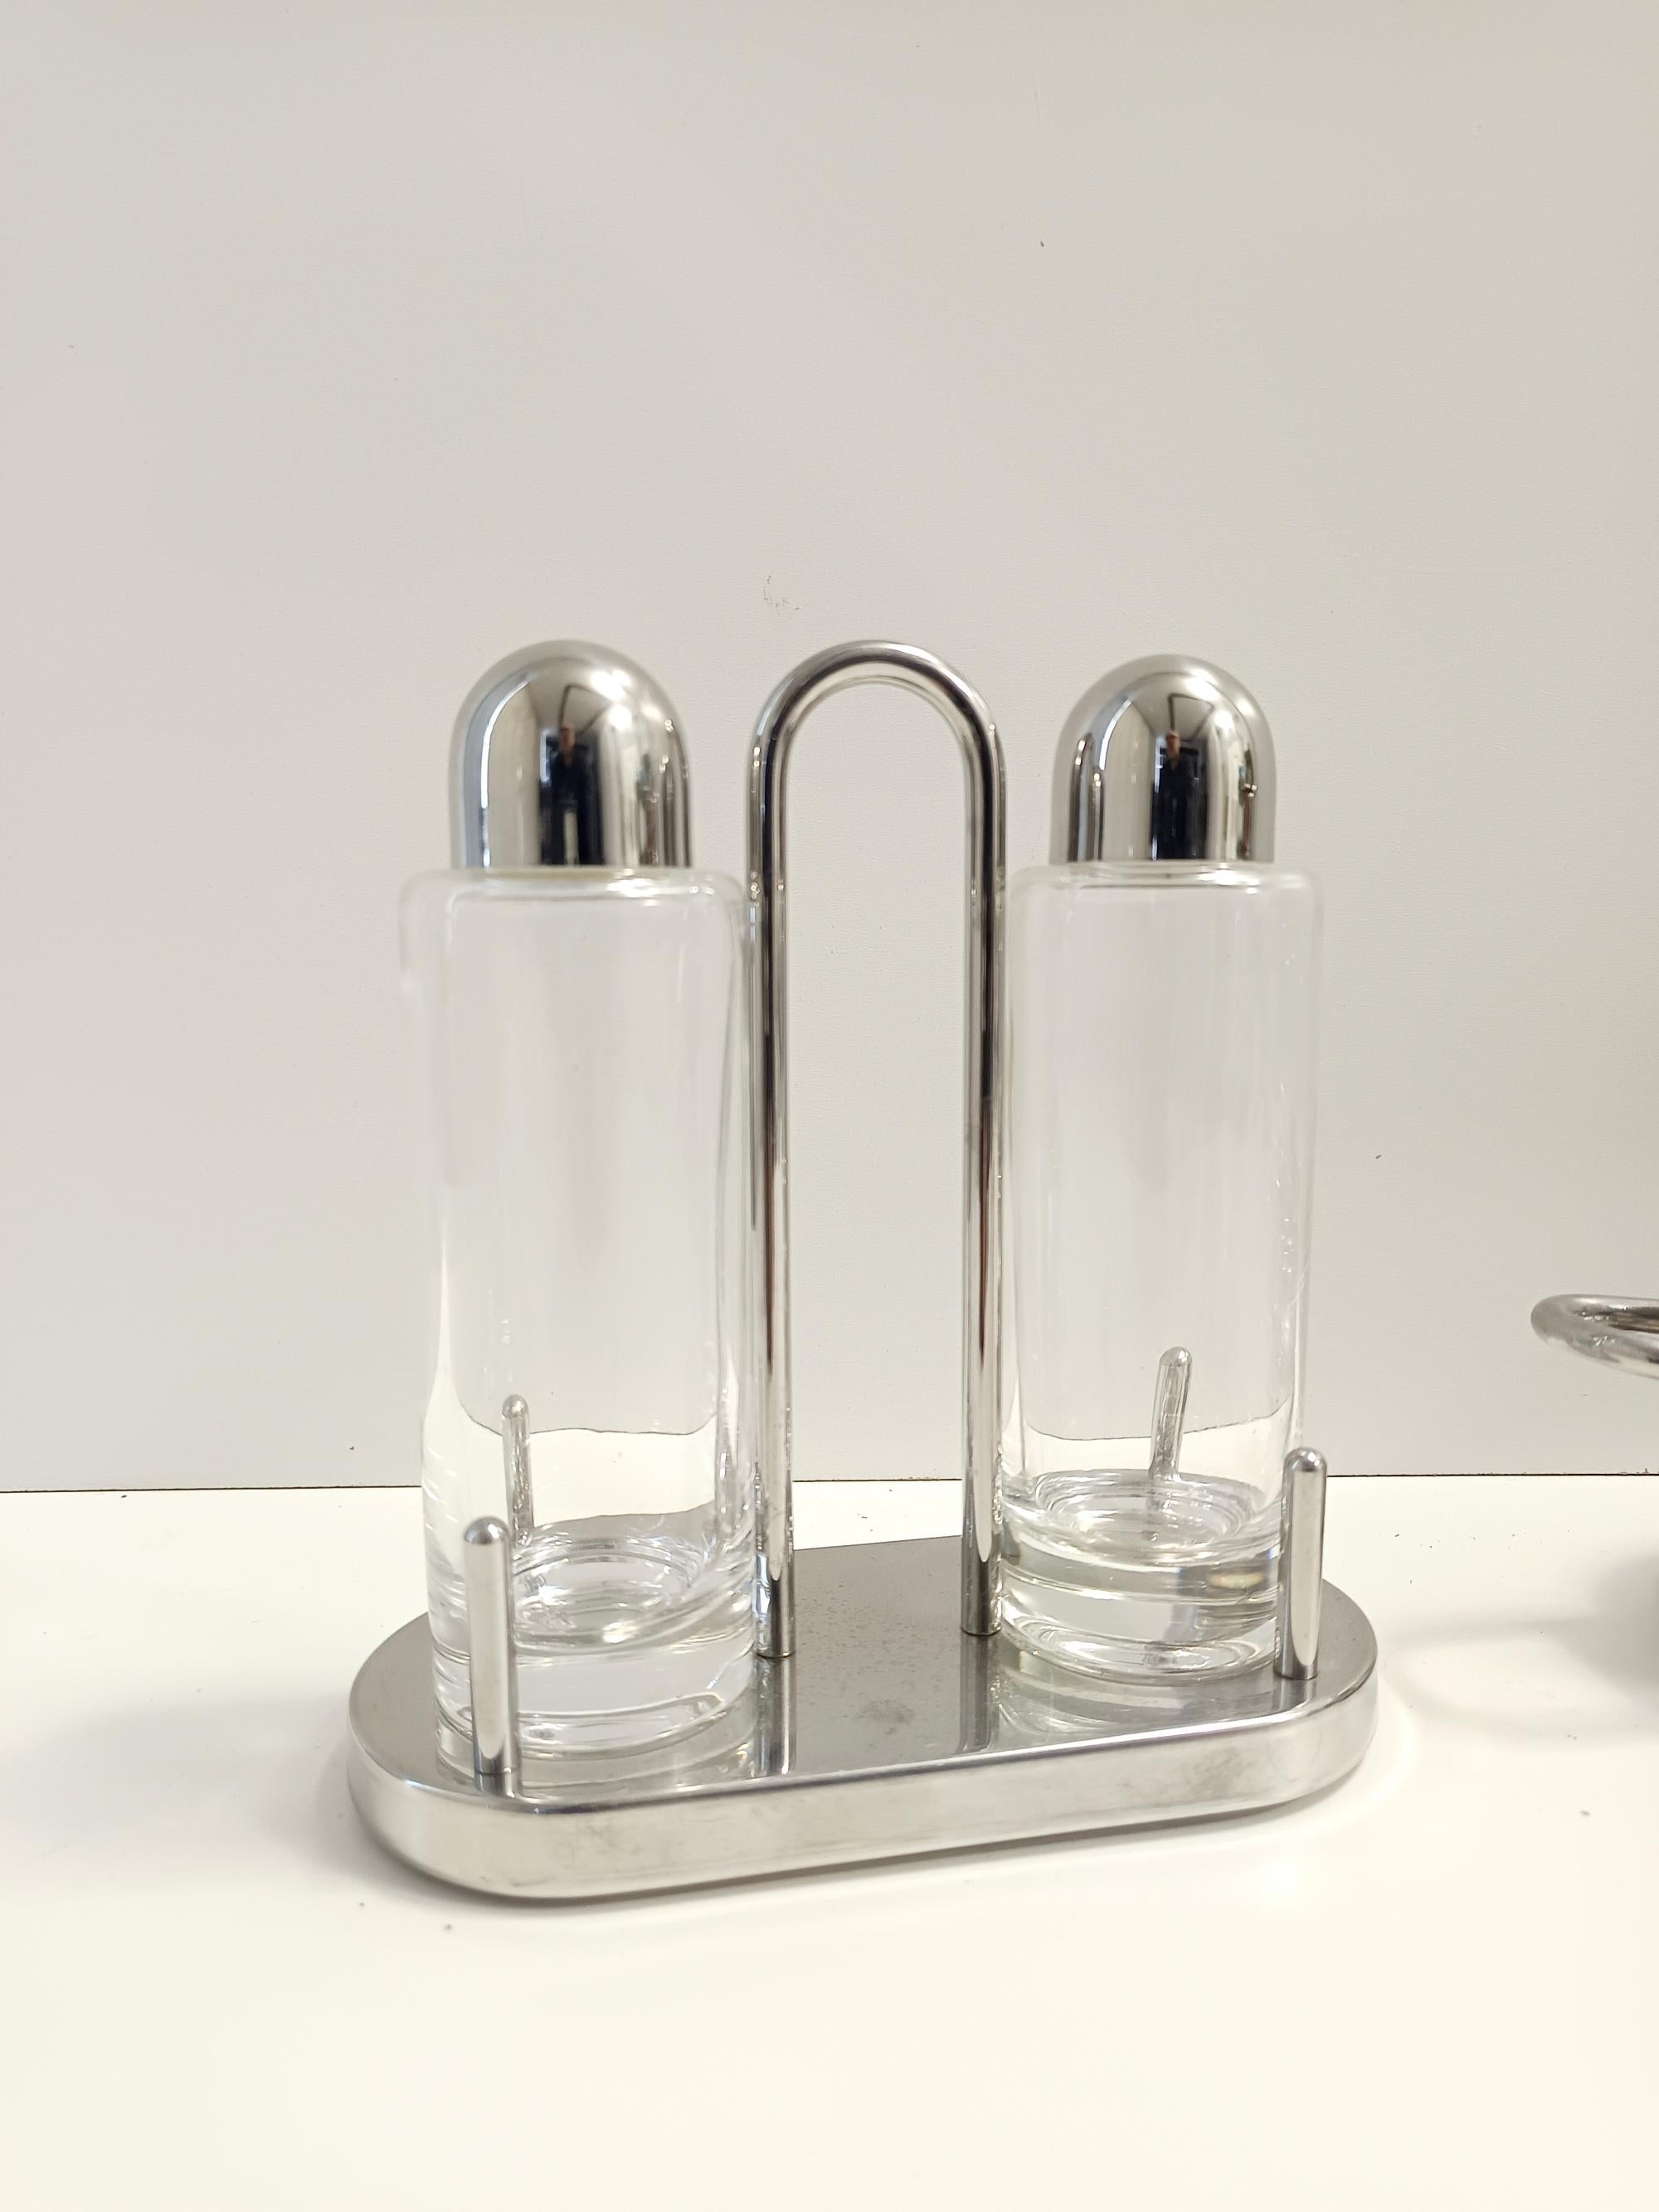 Steel, Glass and Plastic Cruet Set with Cheese Bowl by E. Sottsass for Alessi In Good Condition For Sale In Bresso, Lombardy